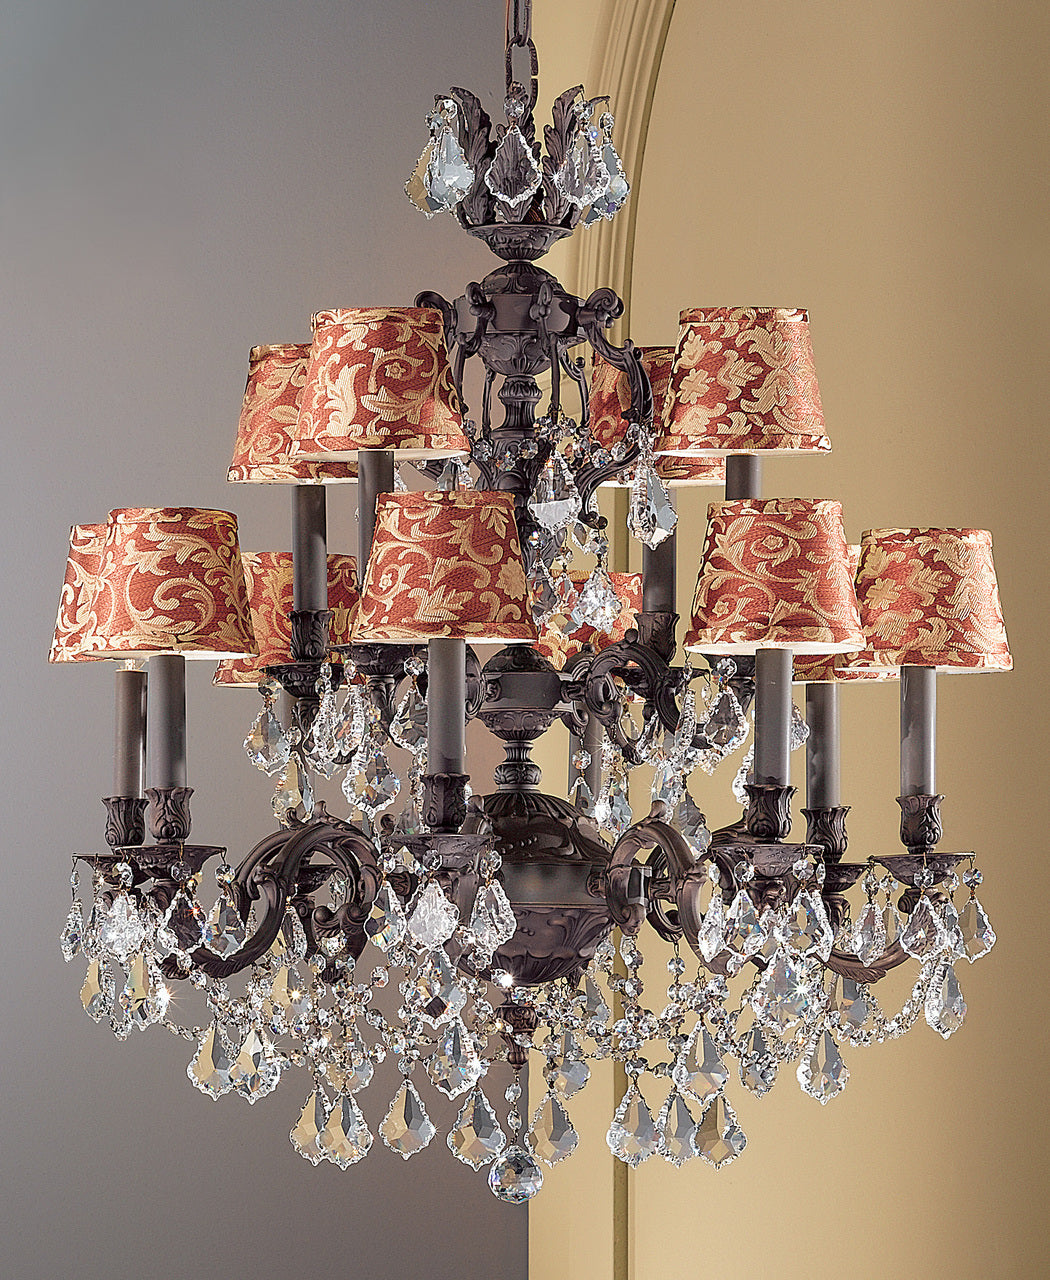 Classic Lighting 57389 AGB CBK Chateau Imperial Crystal Chandelier in Aged Bronze (Imported from Spain)